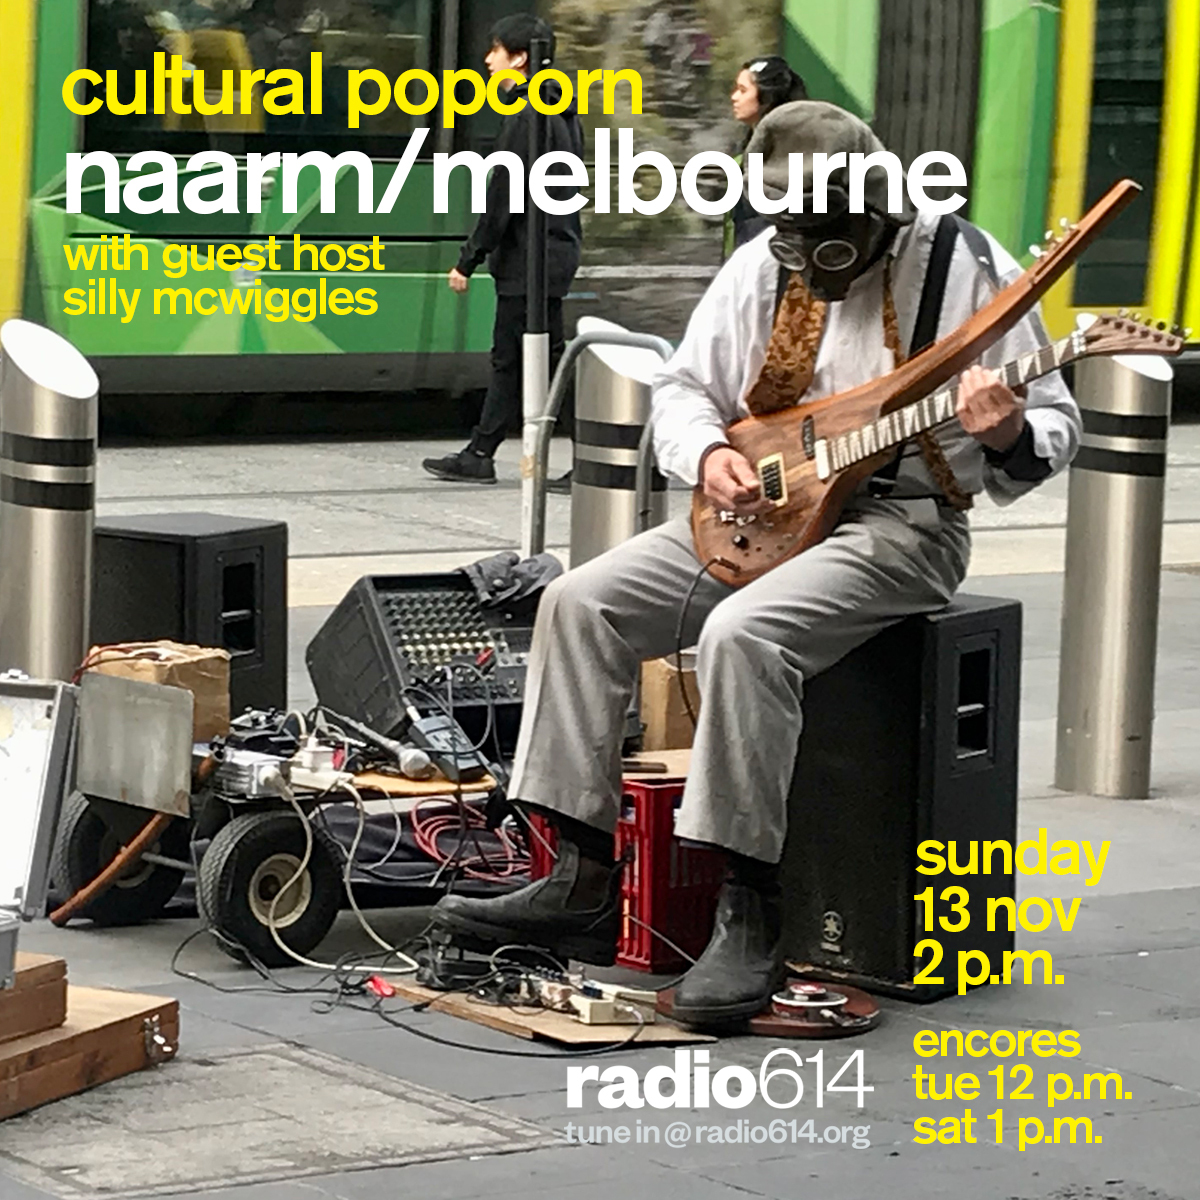 NEW this Sunday 2-4pm EST (7-9pm UK) @radio614 @SillyMcWiggles hosts Cultural Popcorn with #Naarm #Melbourne the musical theme.